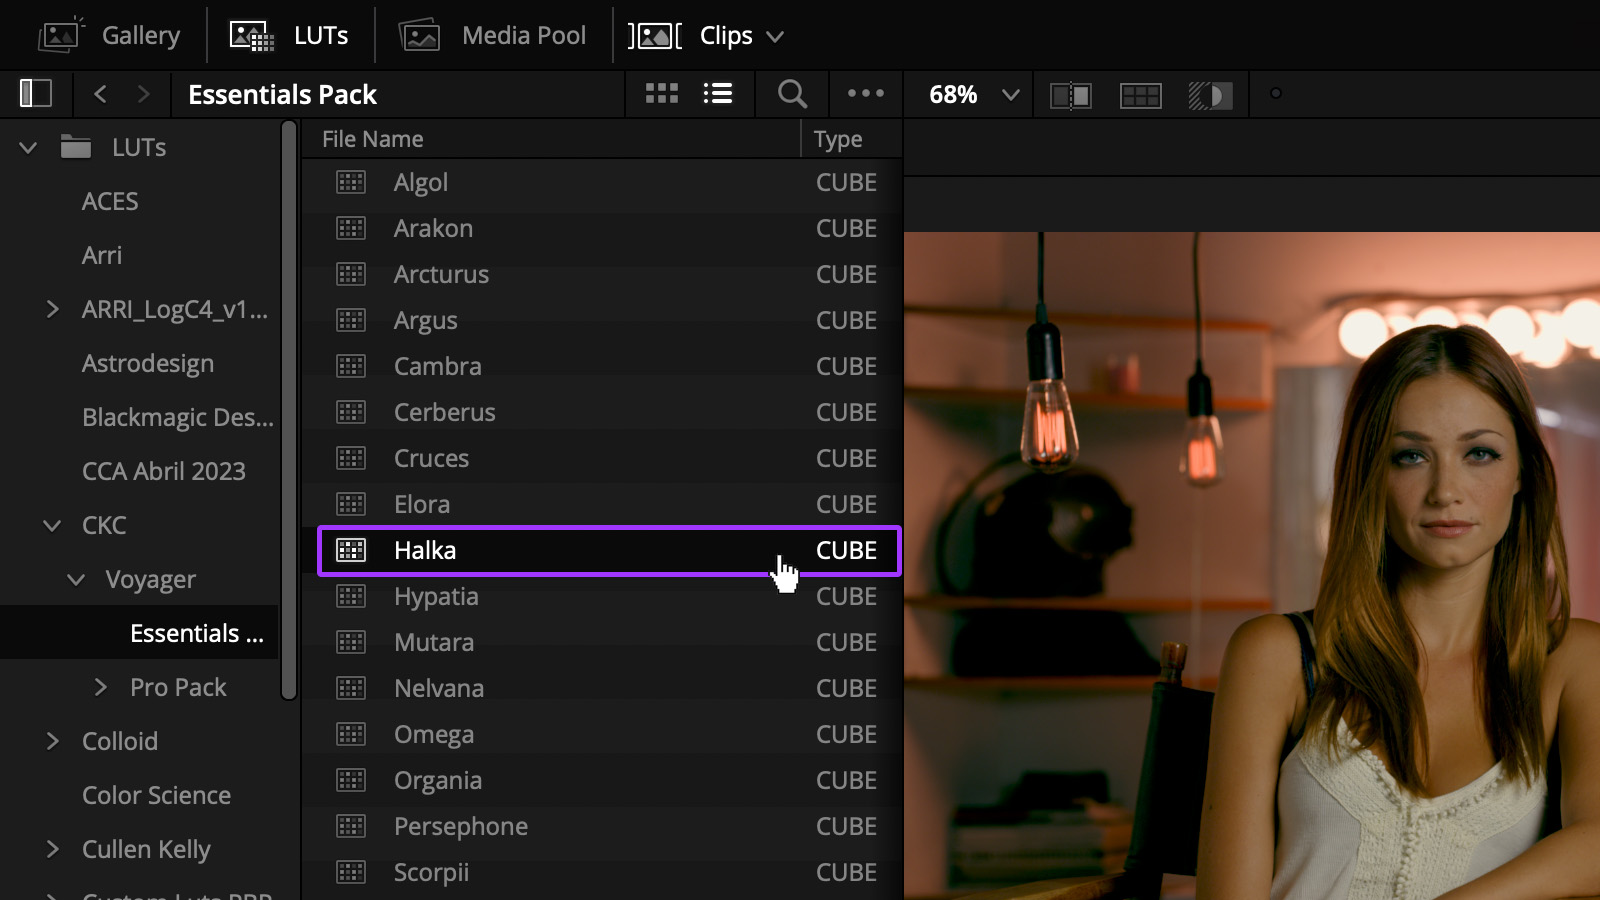 Selecting a LUT in DaVinci Resolve